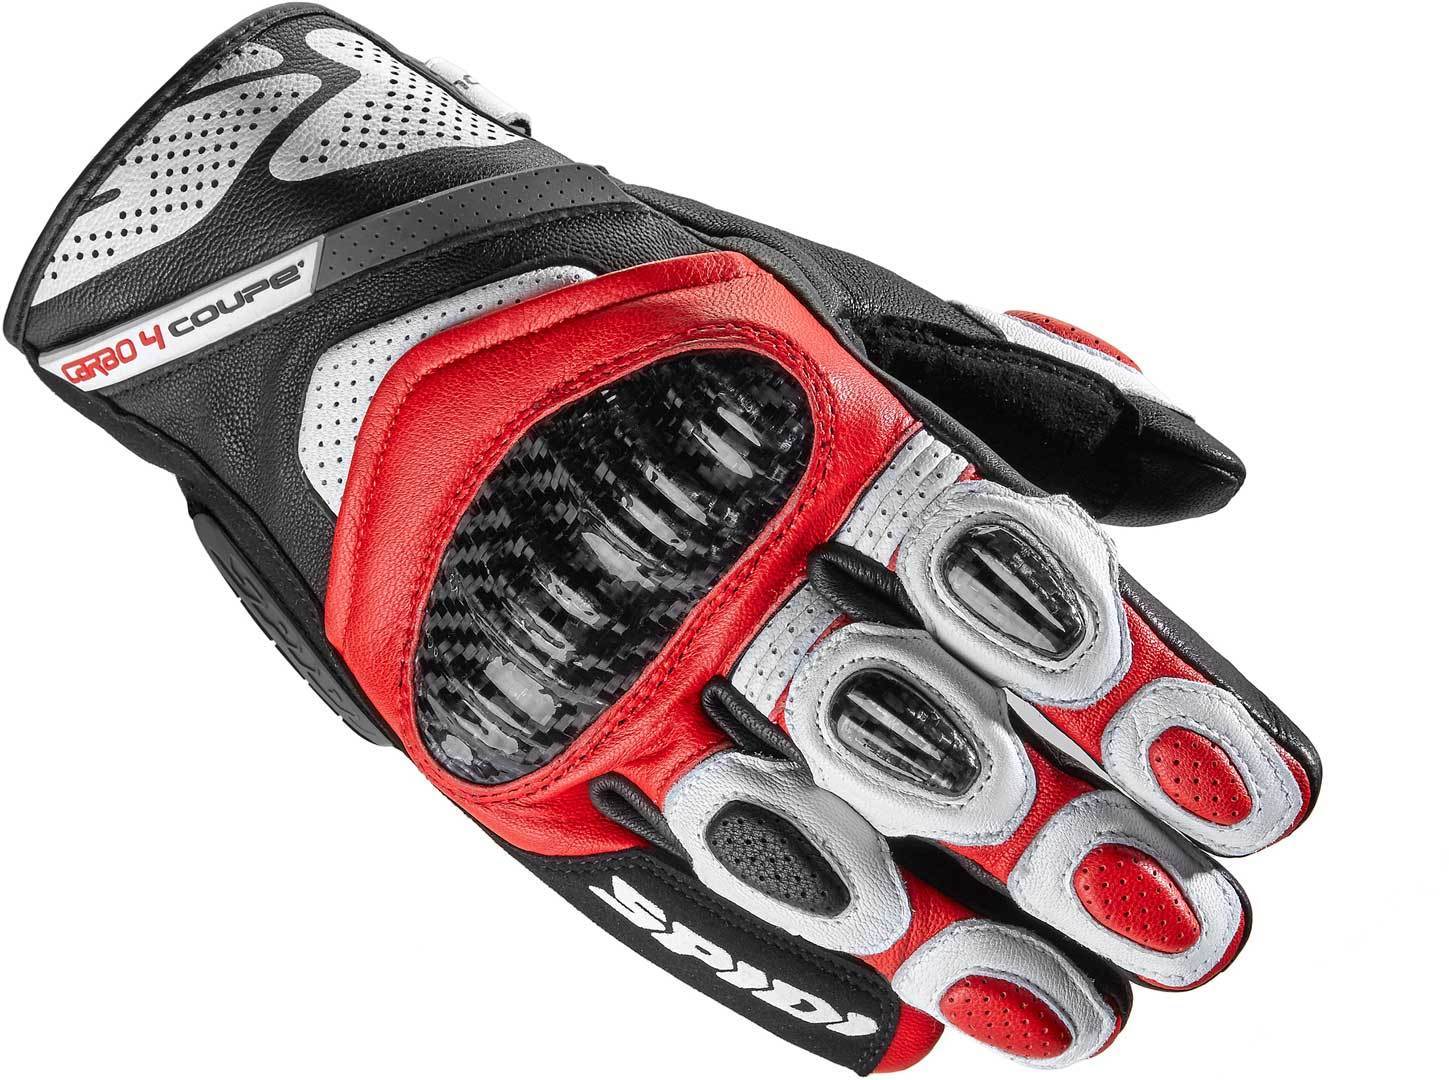 Spidi Carbo 4 Coupe Handschuhe 2XL Schwarz Weiss Rot